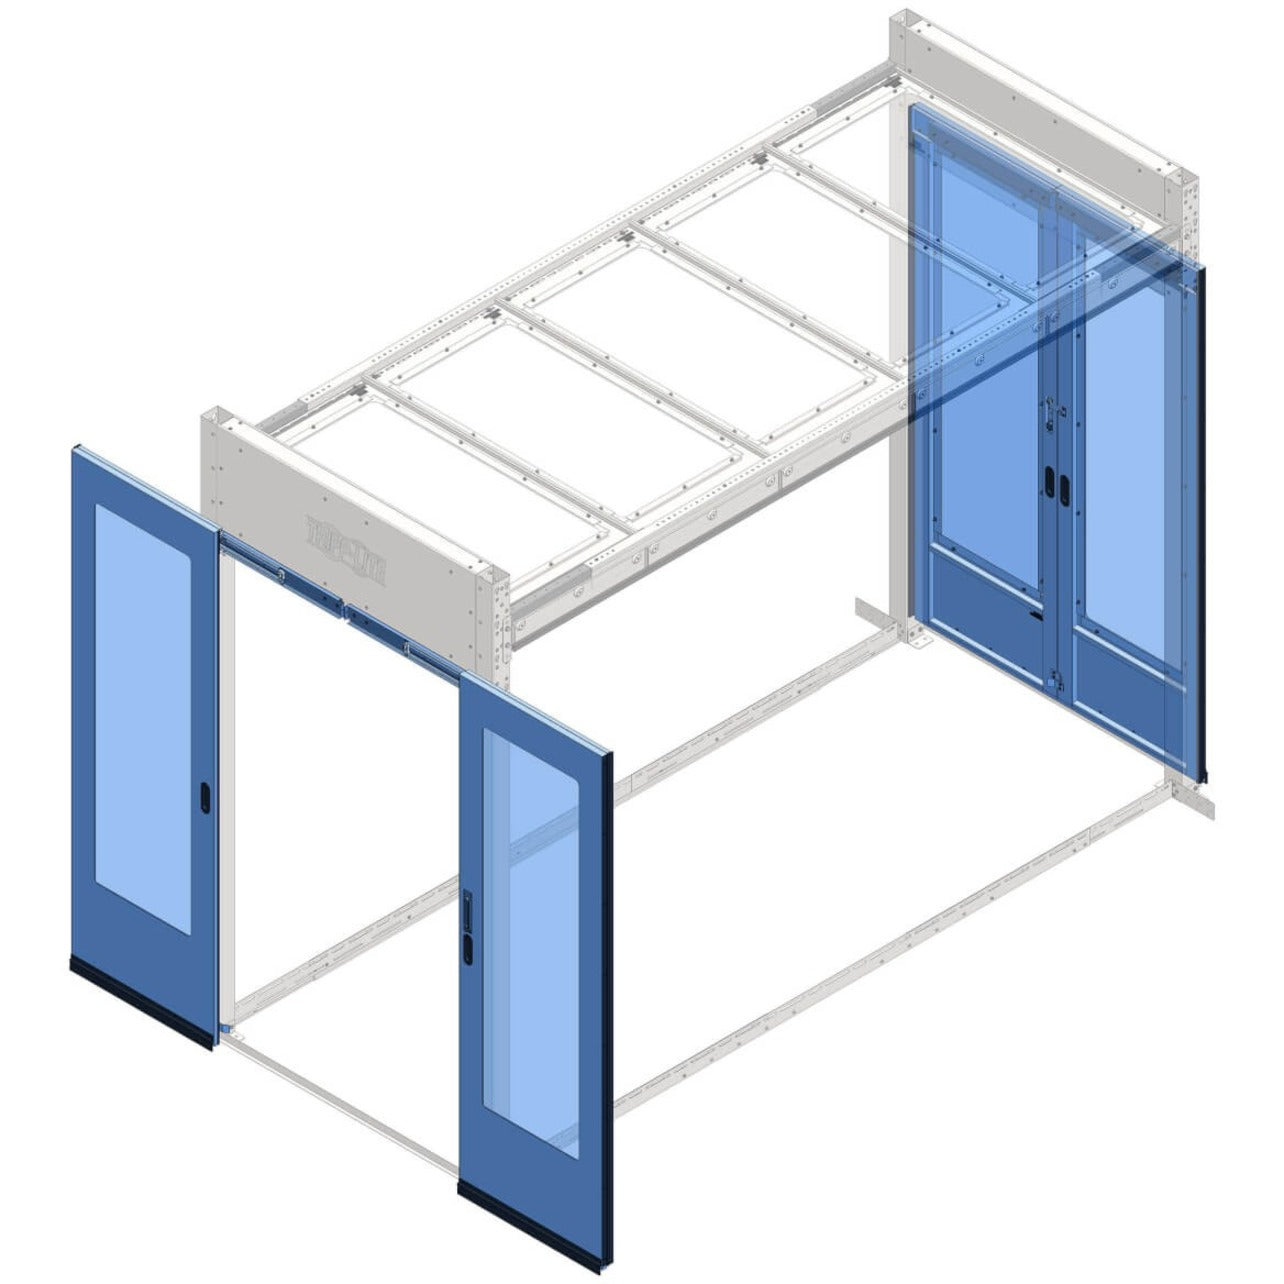 Tripp Lite SRCTMTSDD Sliding Double-Door Kit for Hot/Cold Aisle Containment System, 5 Year Warranty, Easy Installation